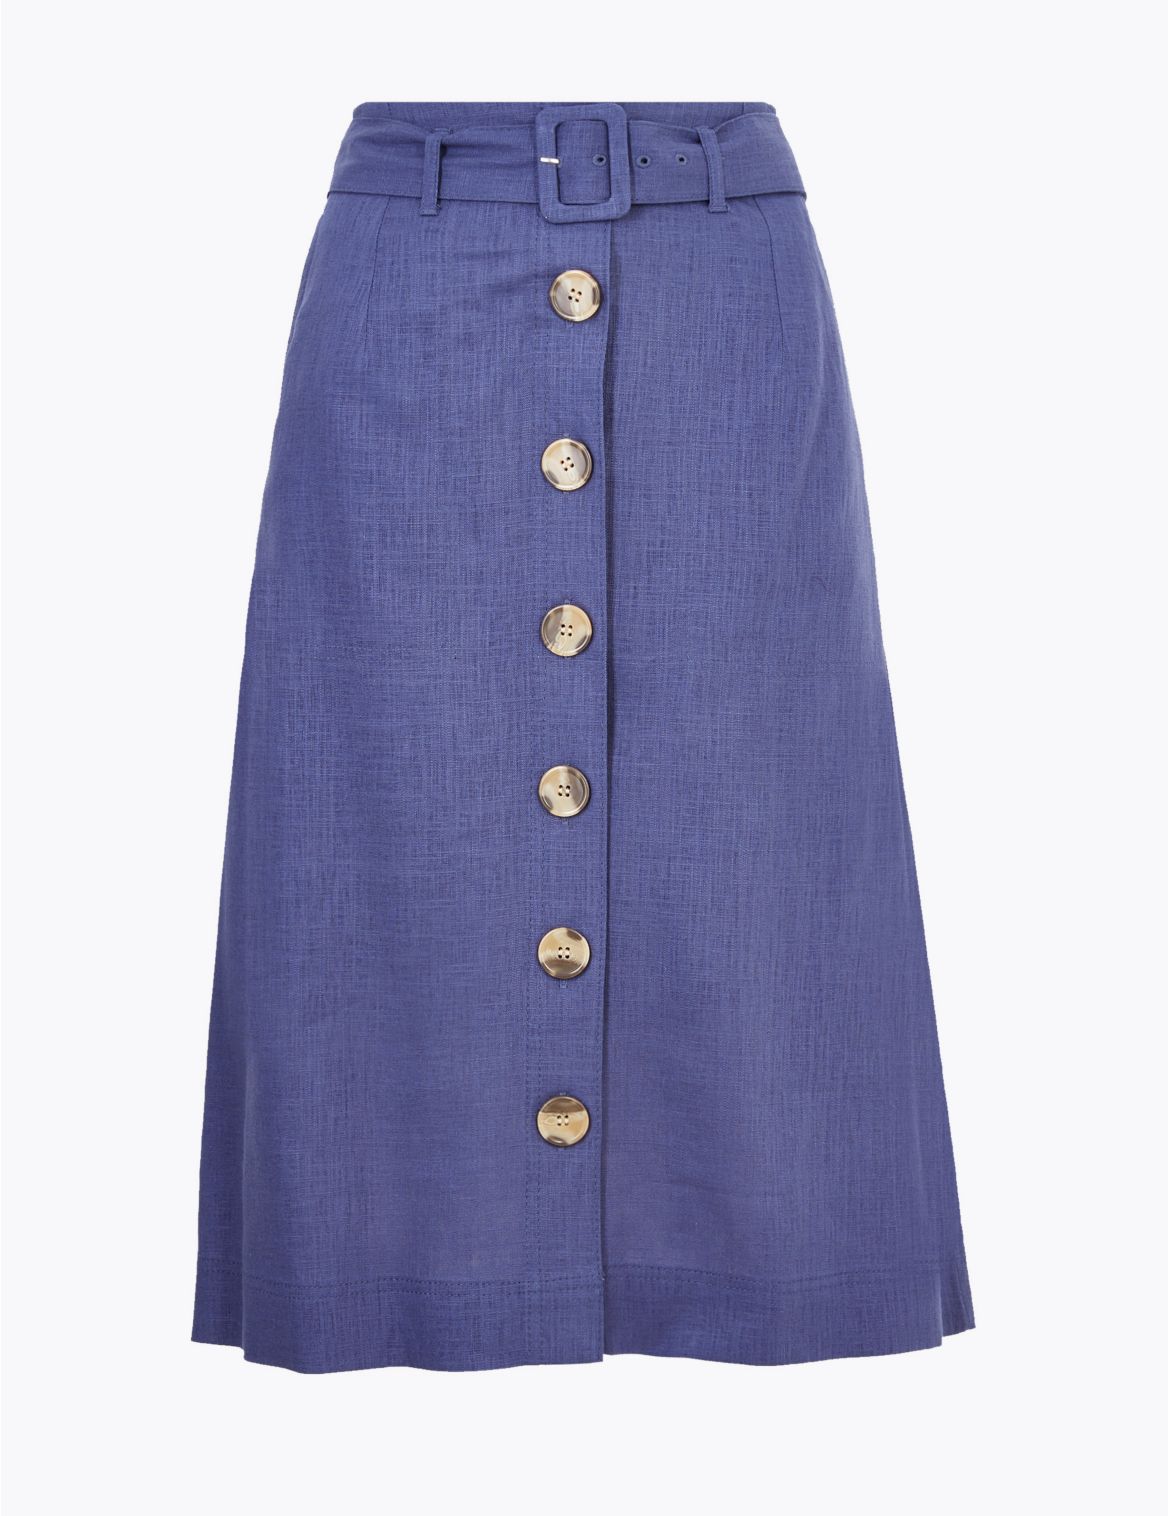 Linen Button Front Belted Midi A-Line Skirt navy